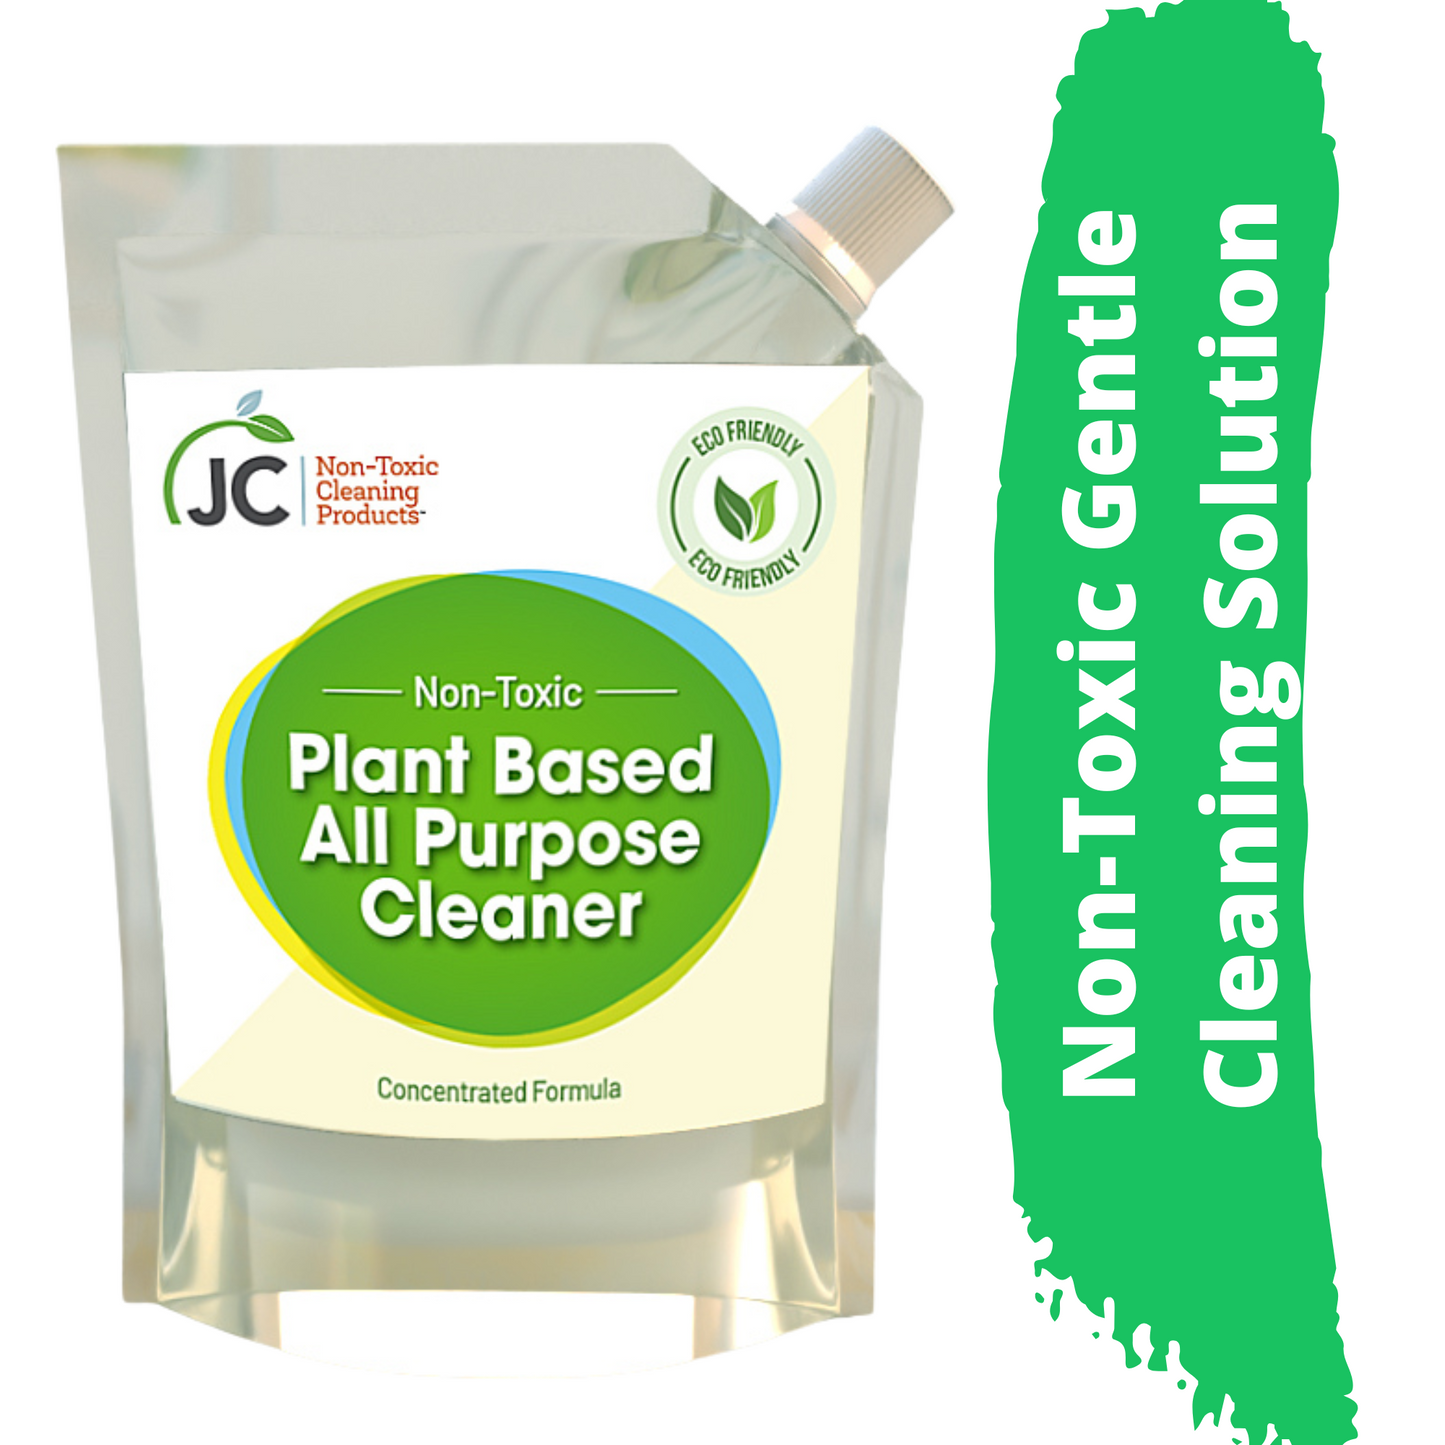 All Purpose Cleaner, Vegan Cleaner, Vegan Dish washing liquid, Vegan house cleaner, Zuhuri Beauty House cleaner, JC Non-Toxic Cleaning Solutions